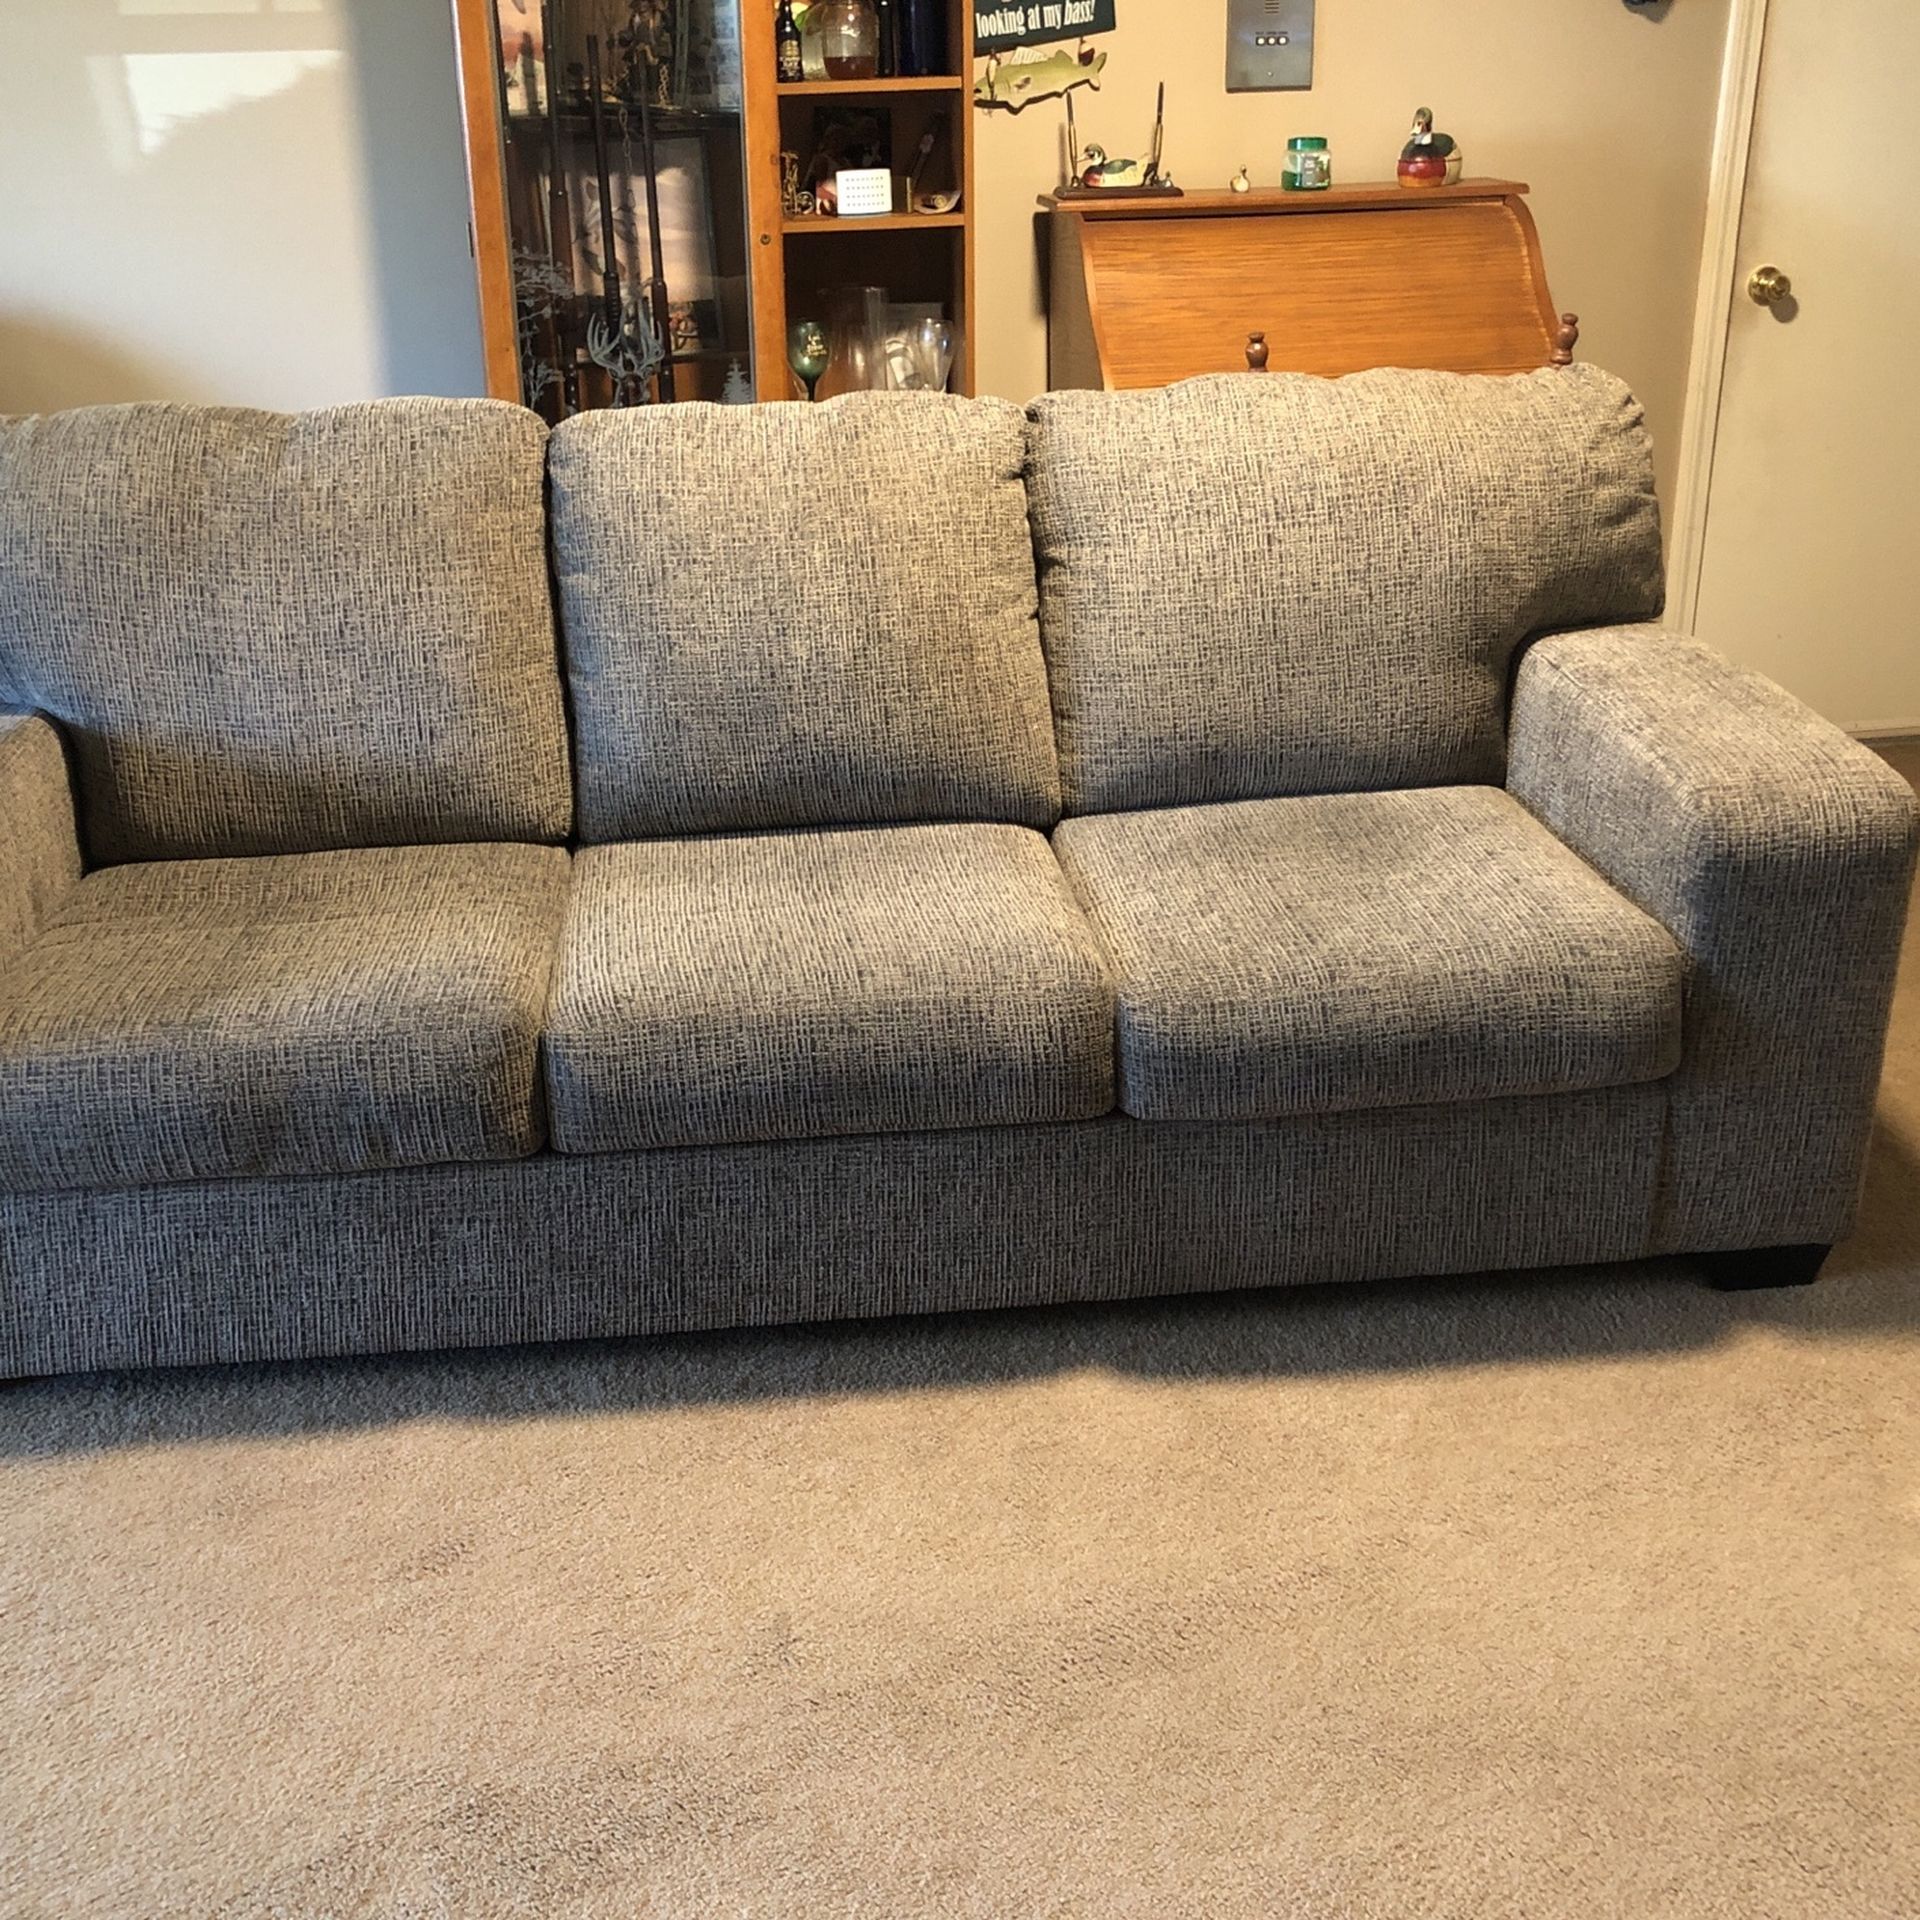 7’8” Long X 3’4” Wide Couch Sold by Bernie and Phyl’s